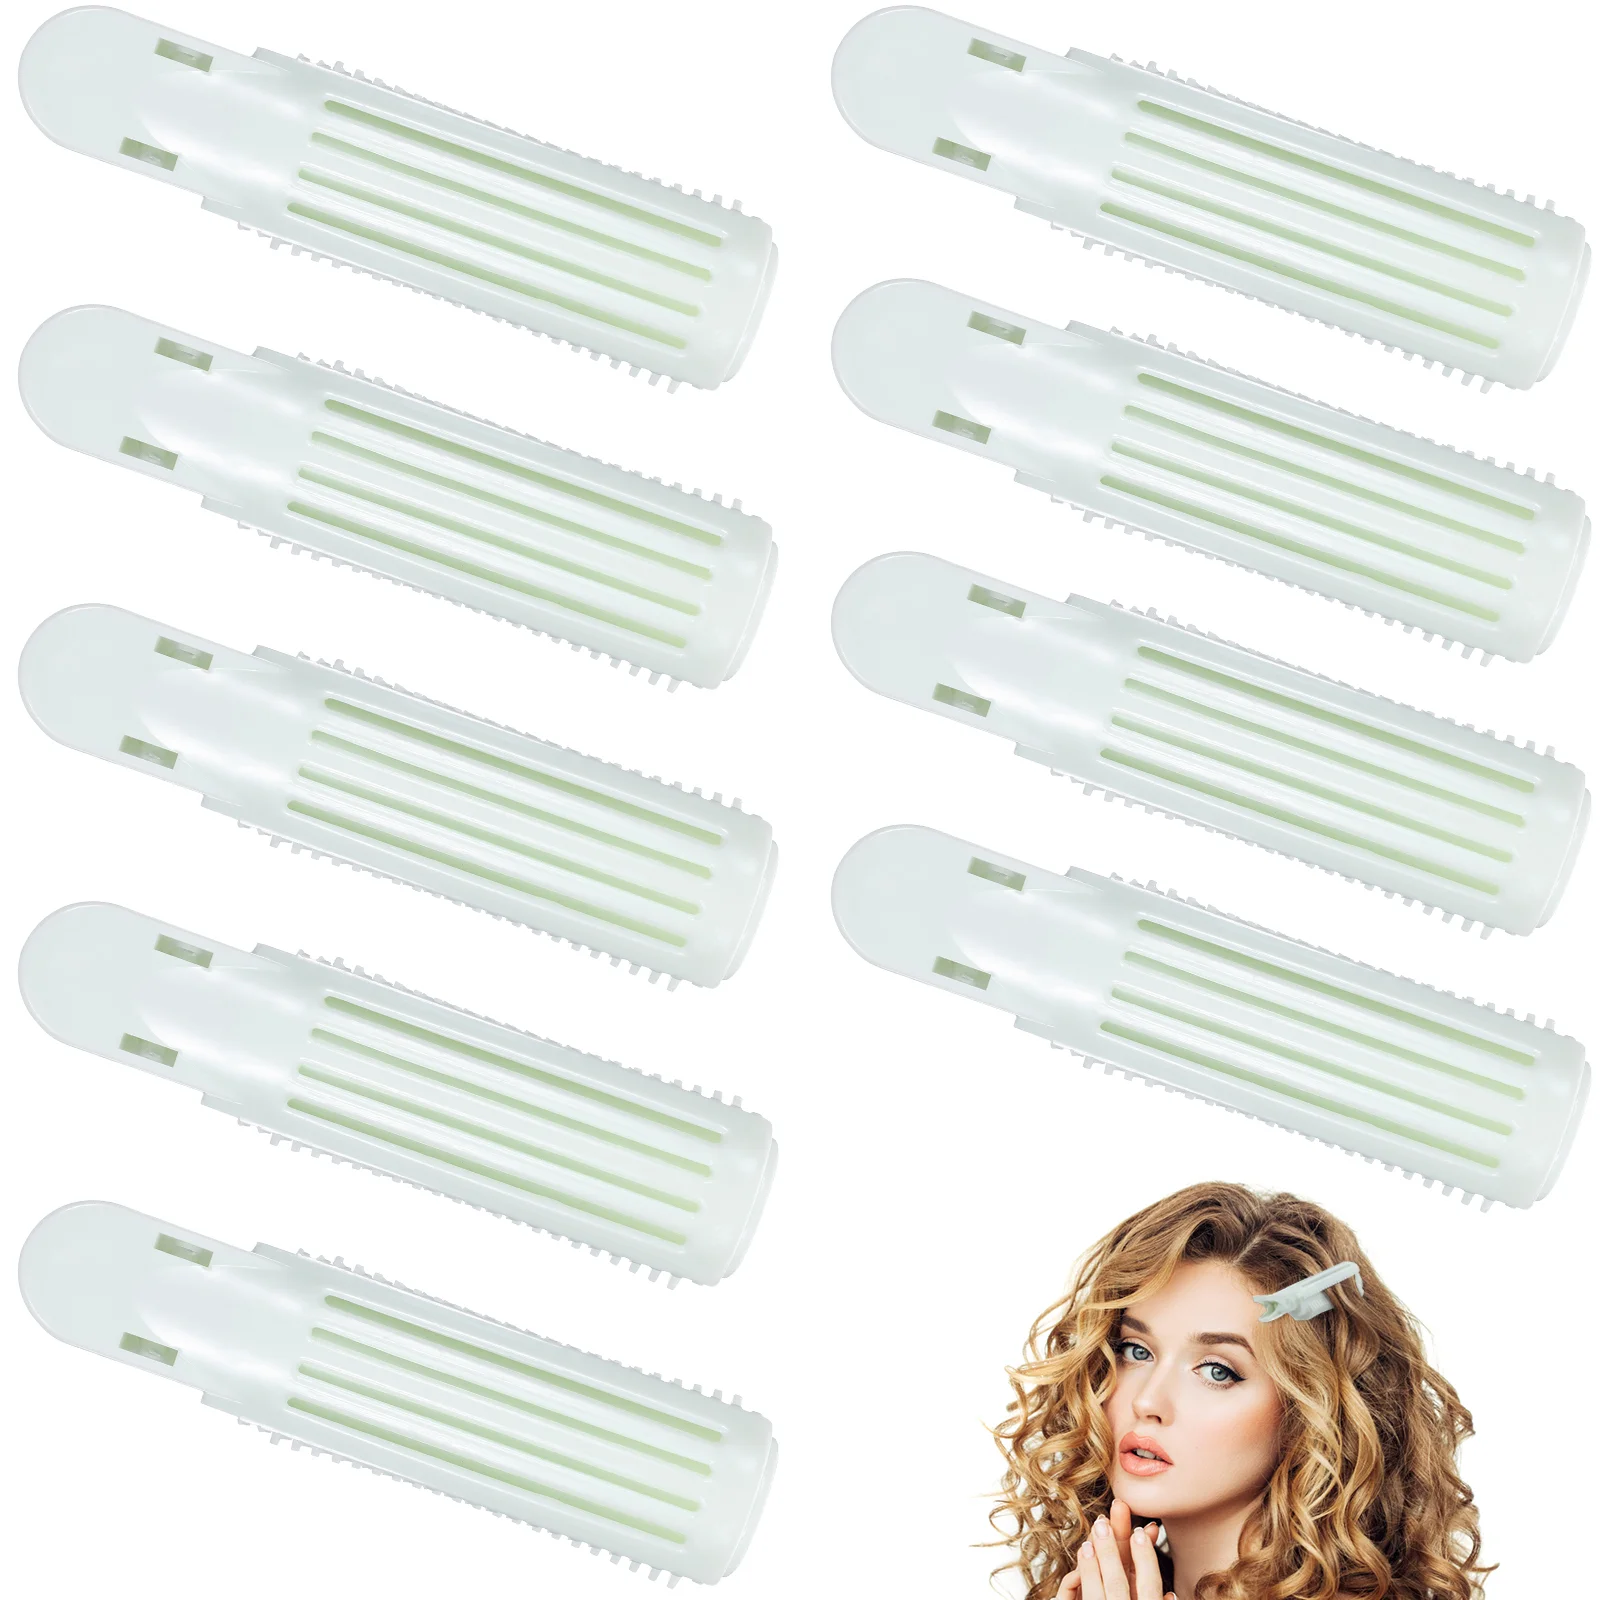 10 Pcs Curlers Bangs Clips Root for Curly Hair Volume Rollers Barrettes Volumizing Adjustable radio pilot aviation headset 5 pin xlr airbus pilot headset adjustable volume